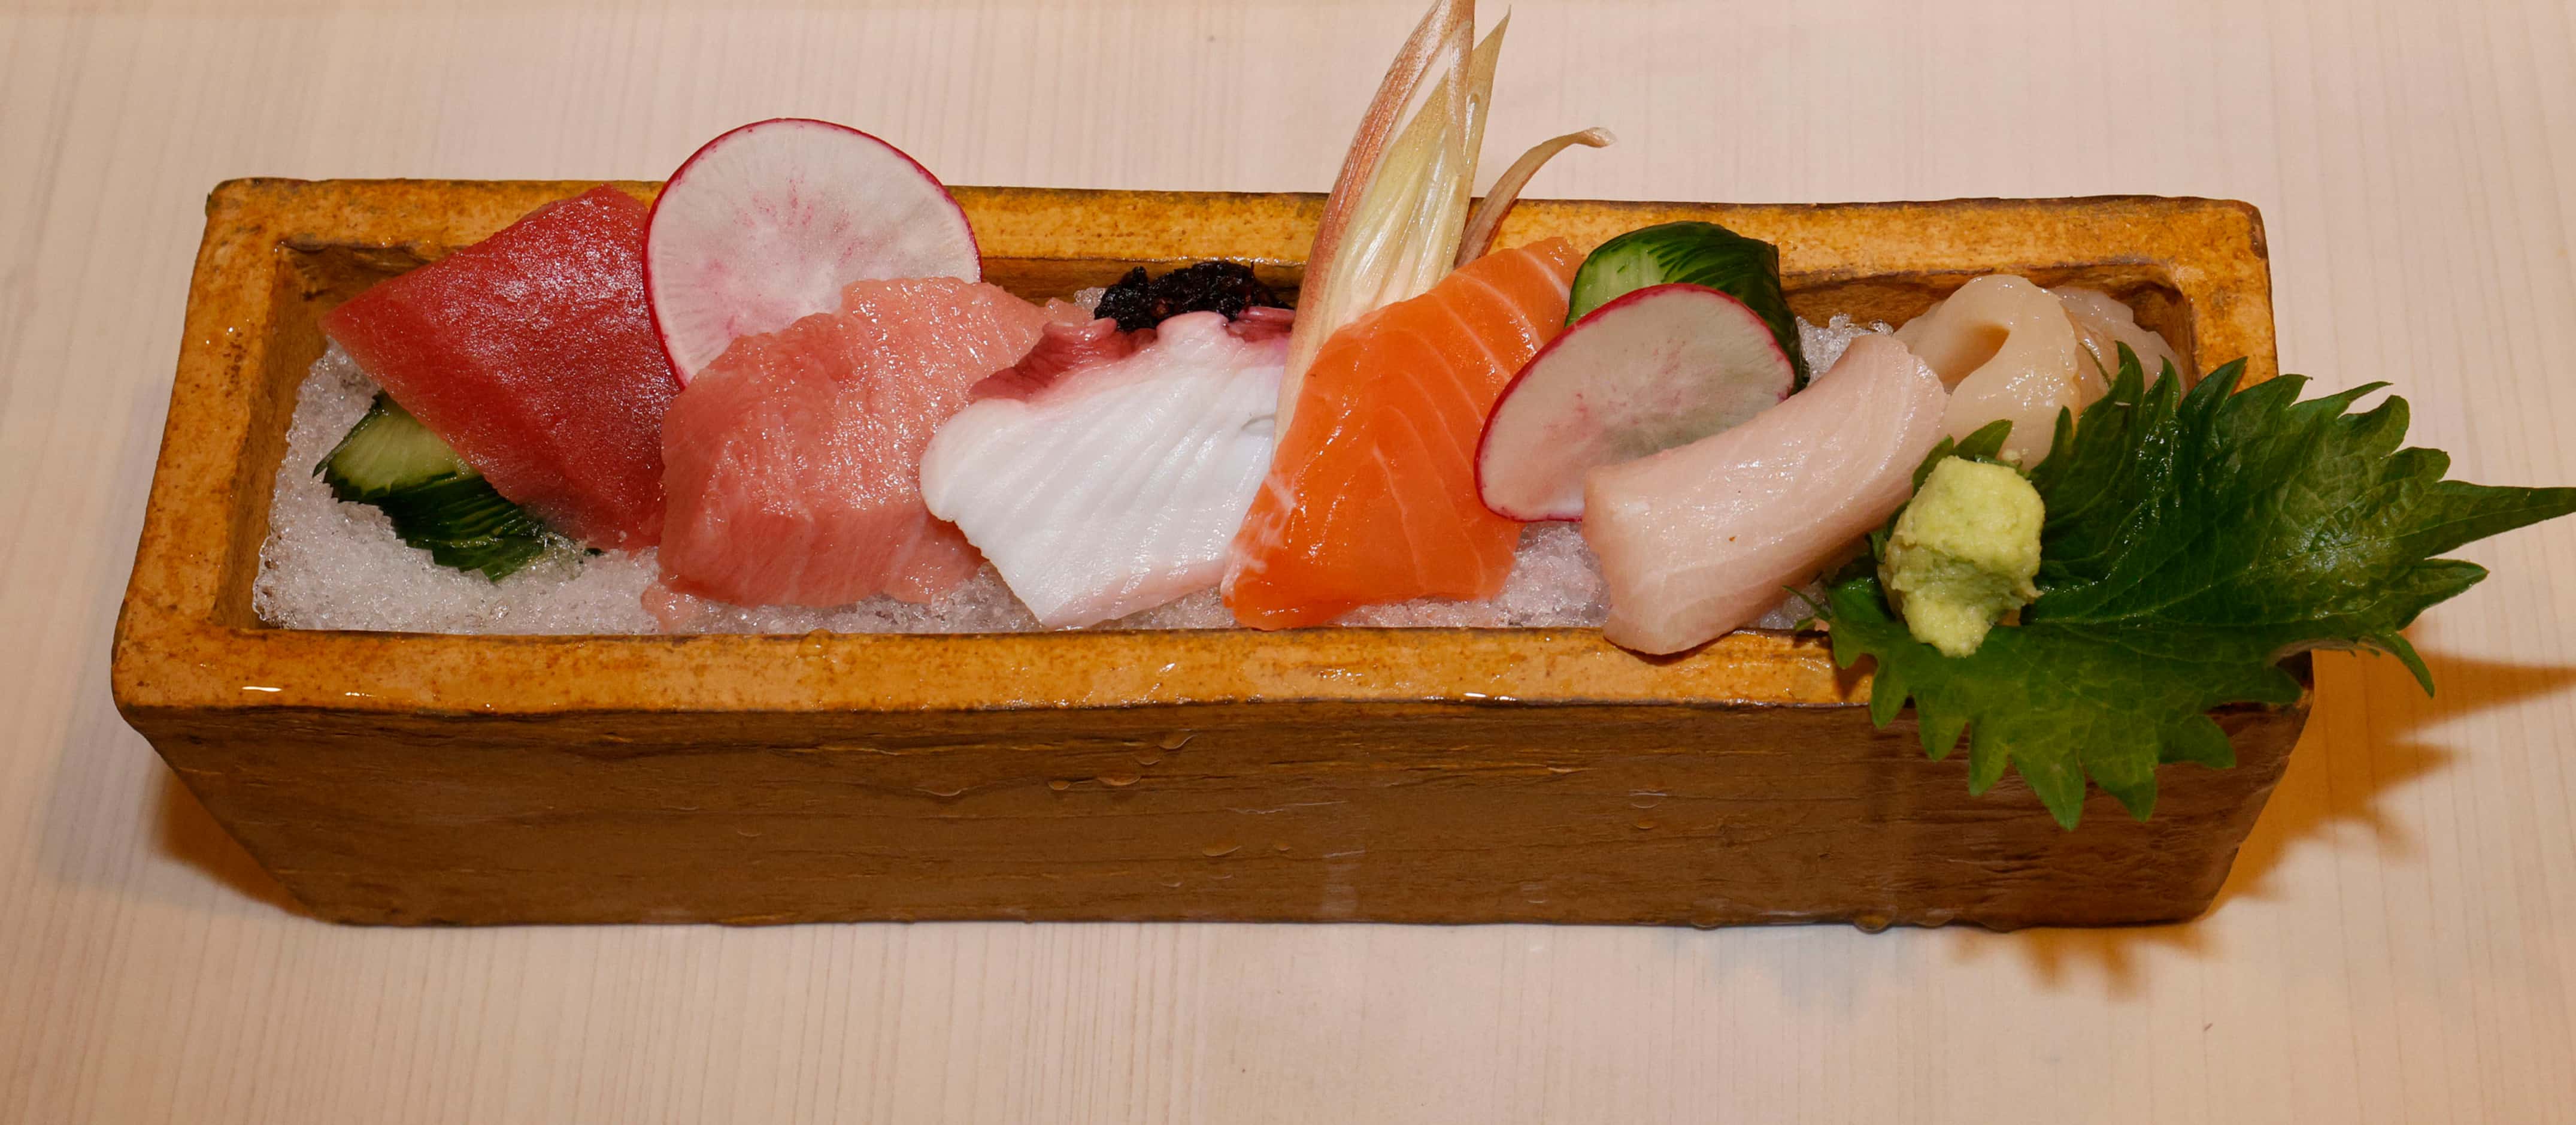 Here's a close-up of the sashimi course at Dallas restaurant Mabo.